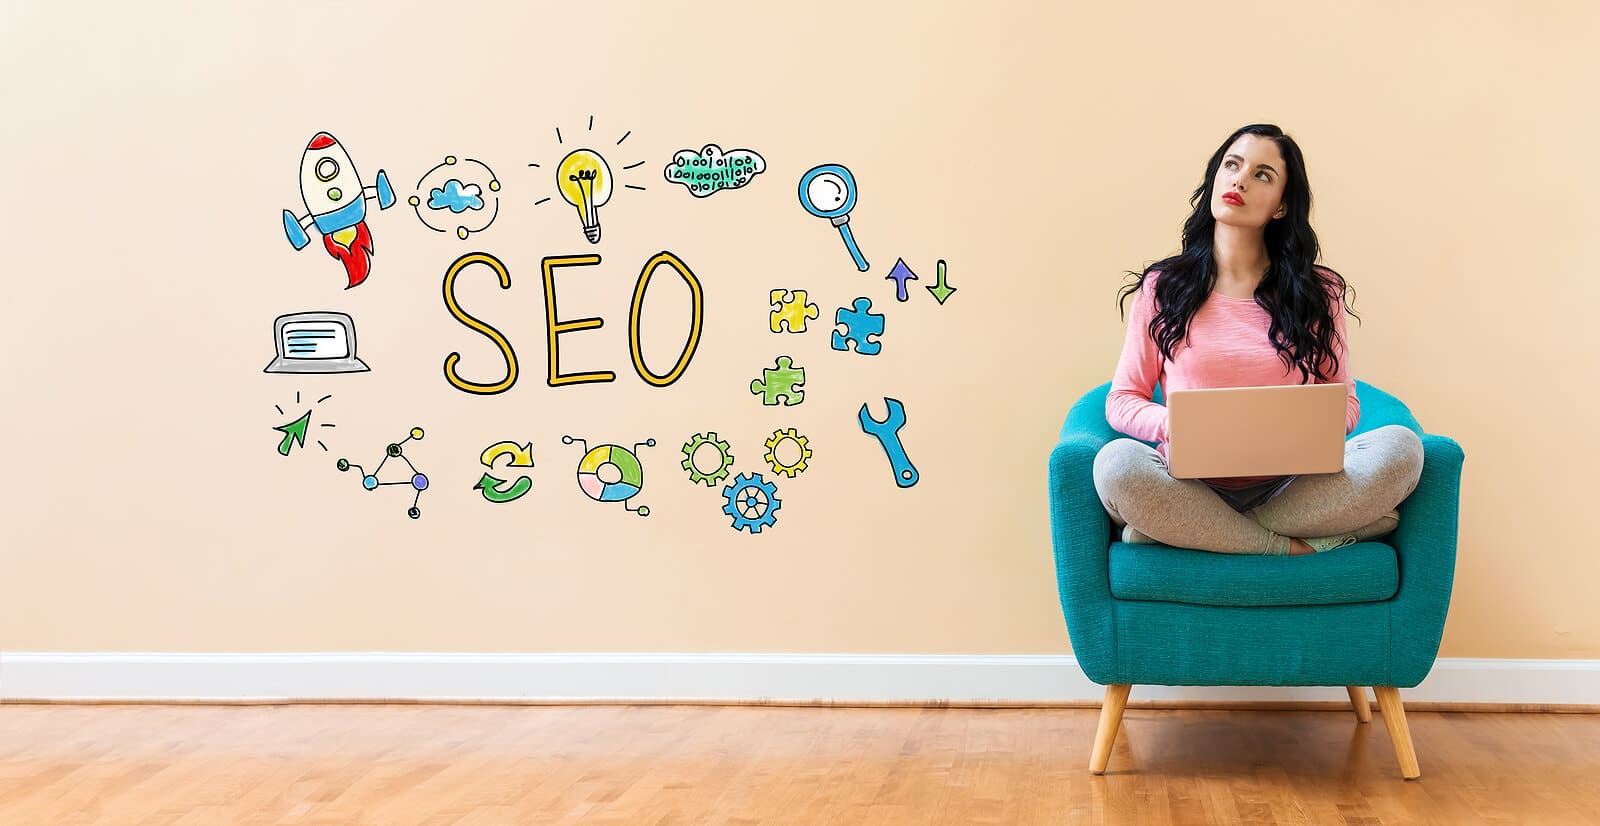 A woman looks up thinking about the words SEO next to her. Looking to understand SEO for medical practices? Our services can help you improve your healthcare SEO. Contact us today!